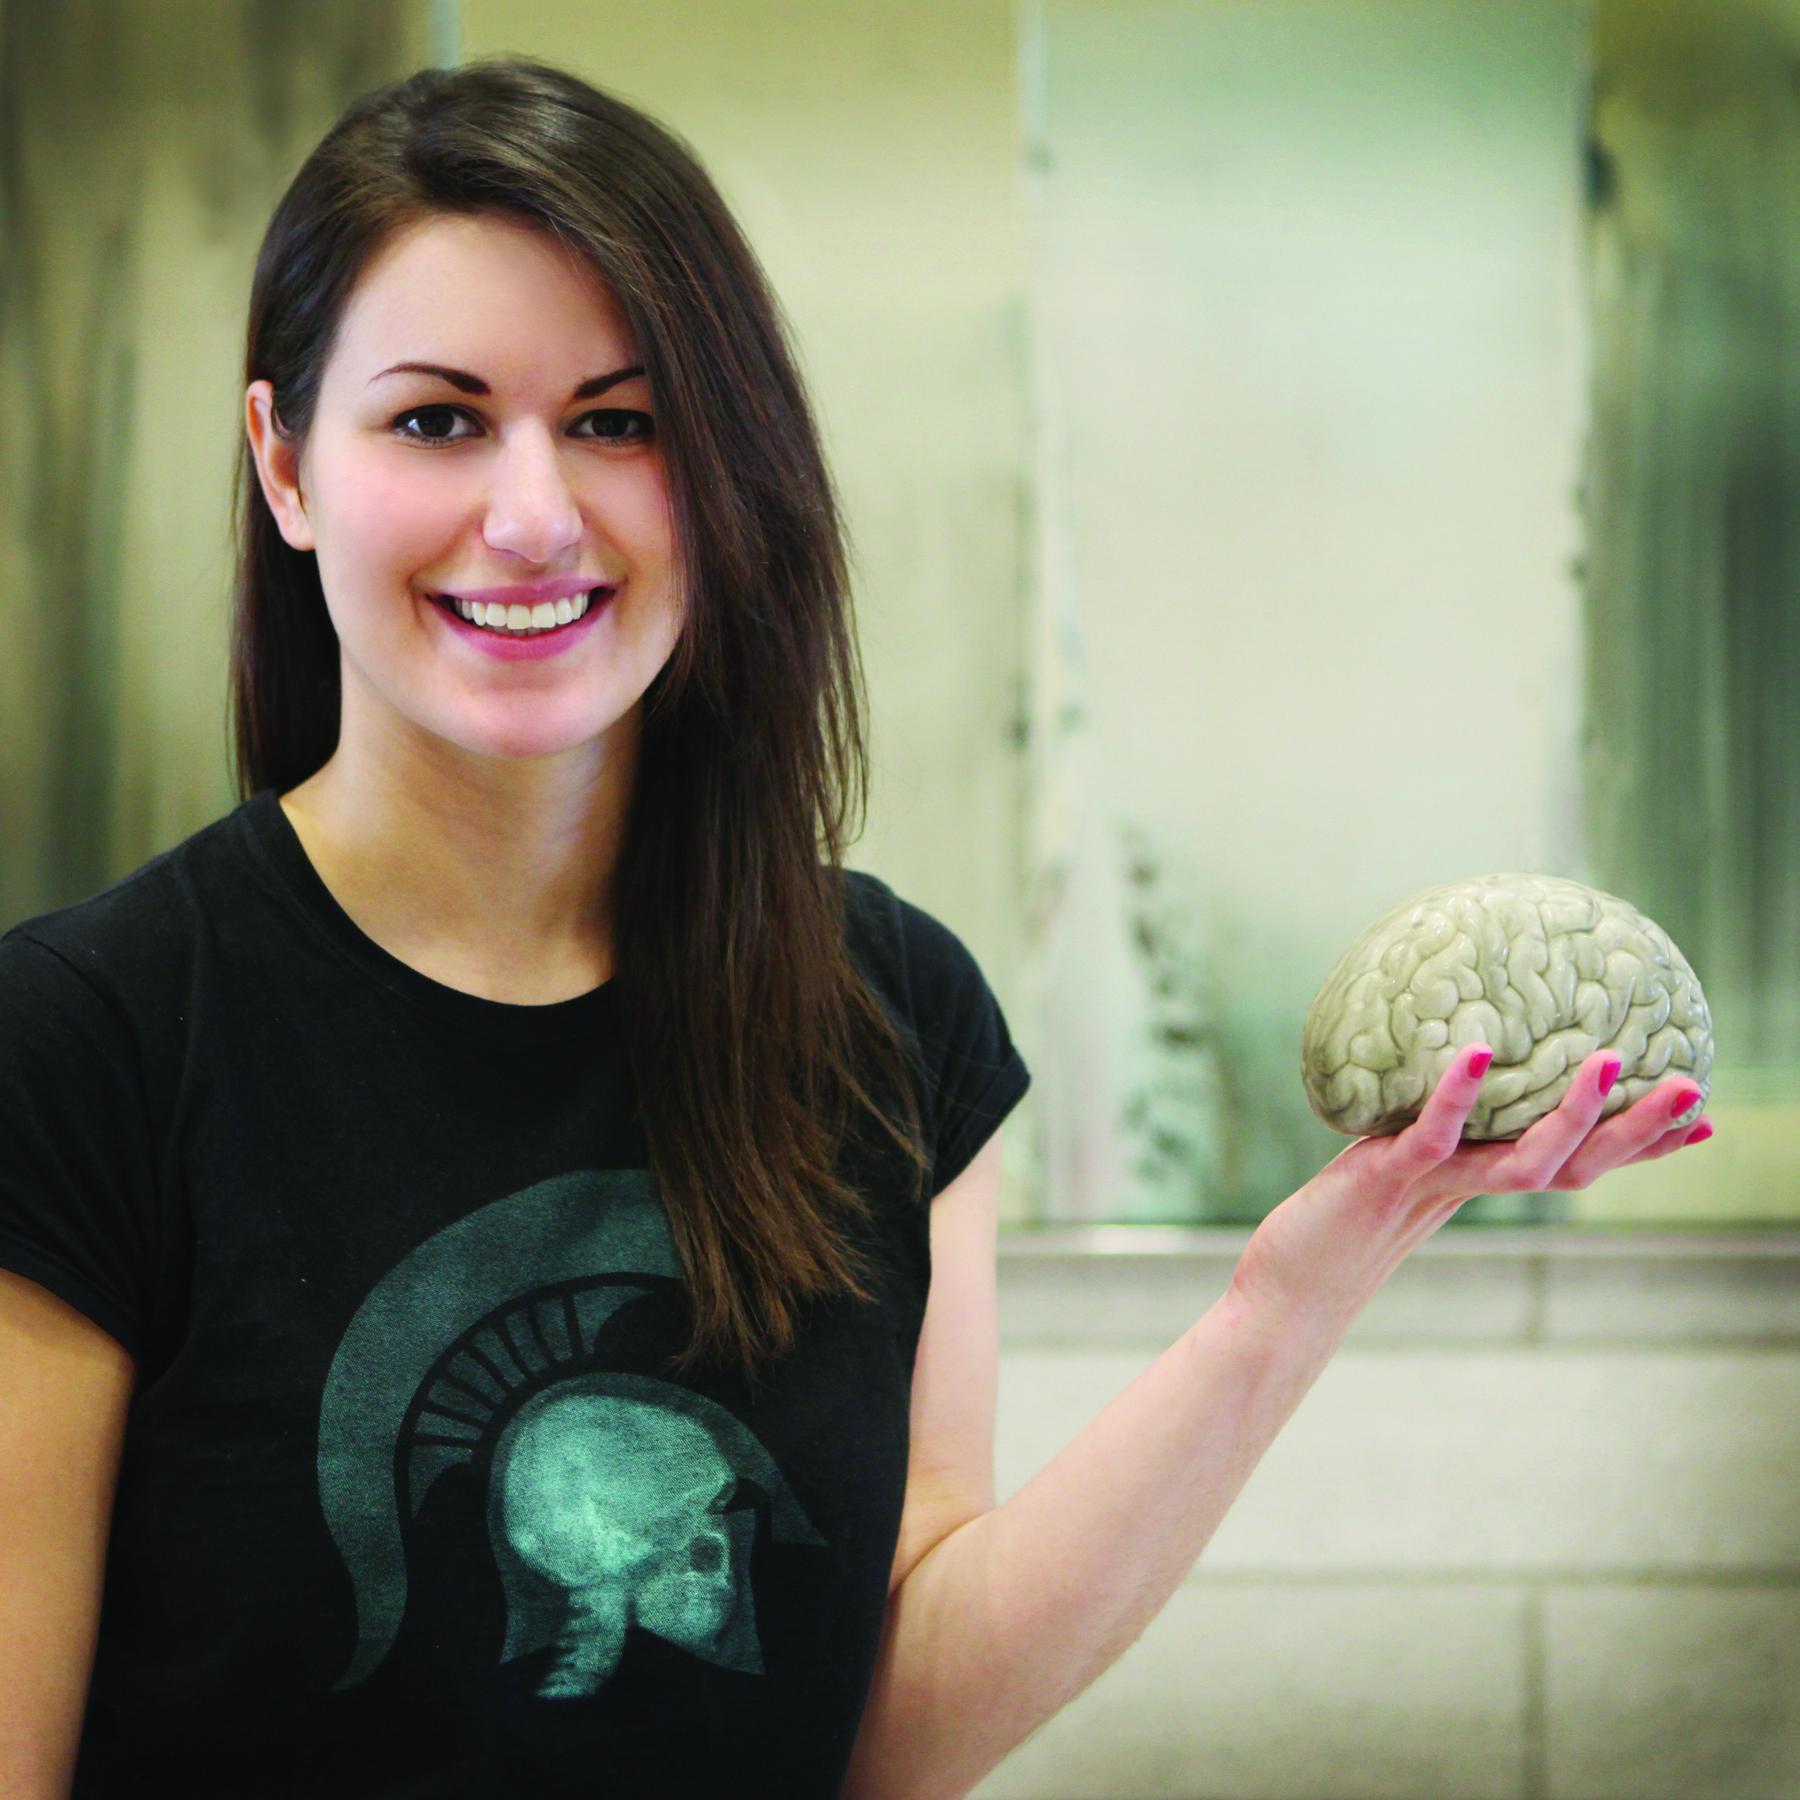 Younger woman holding a model brain.